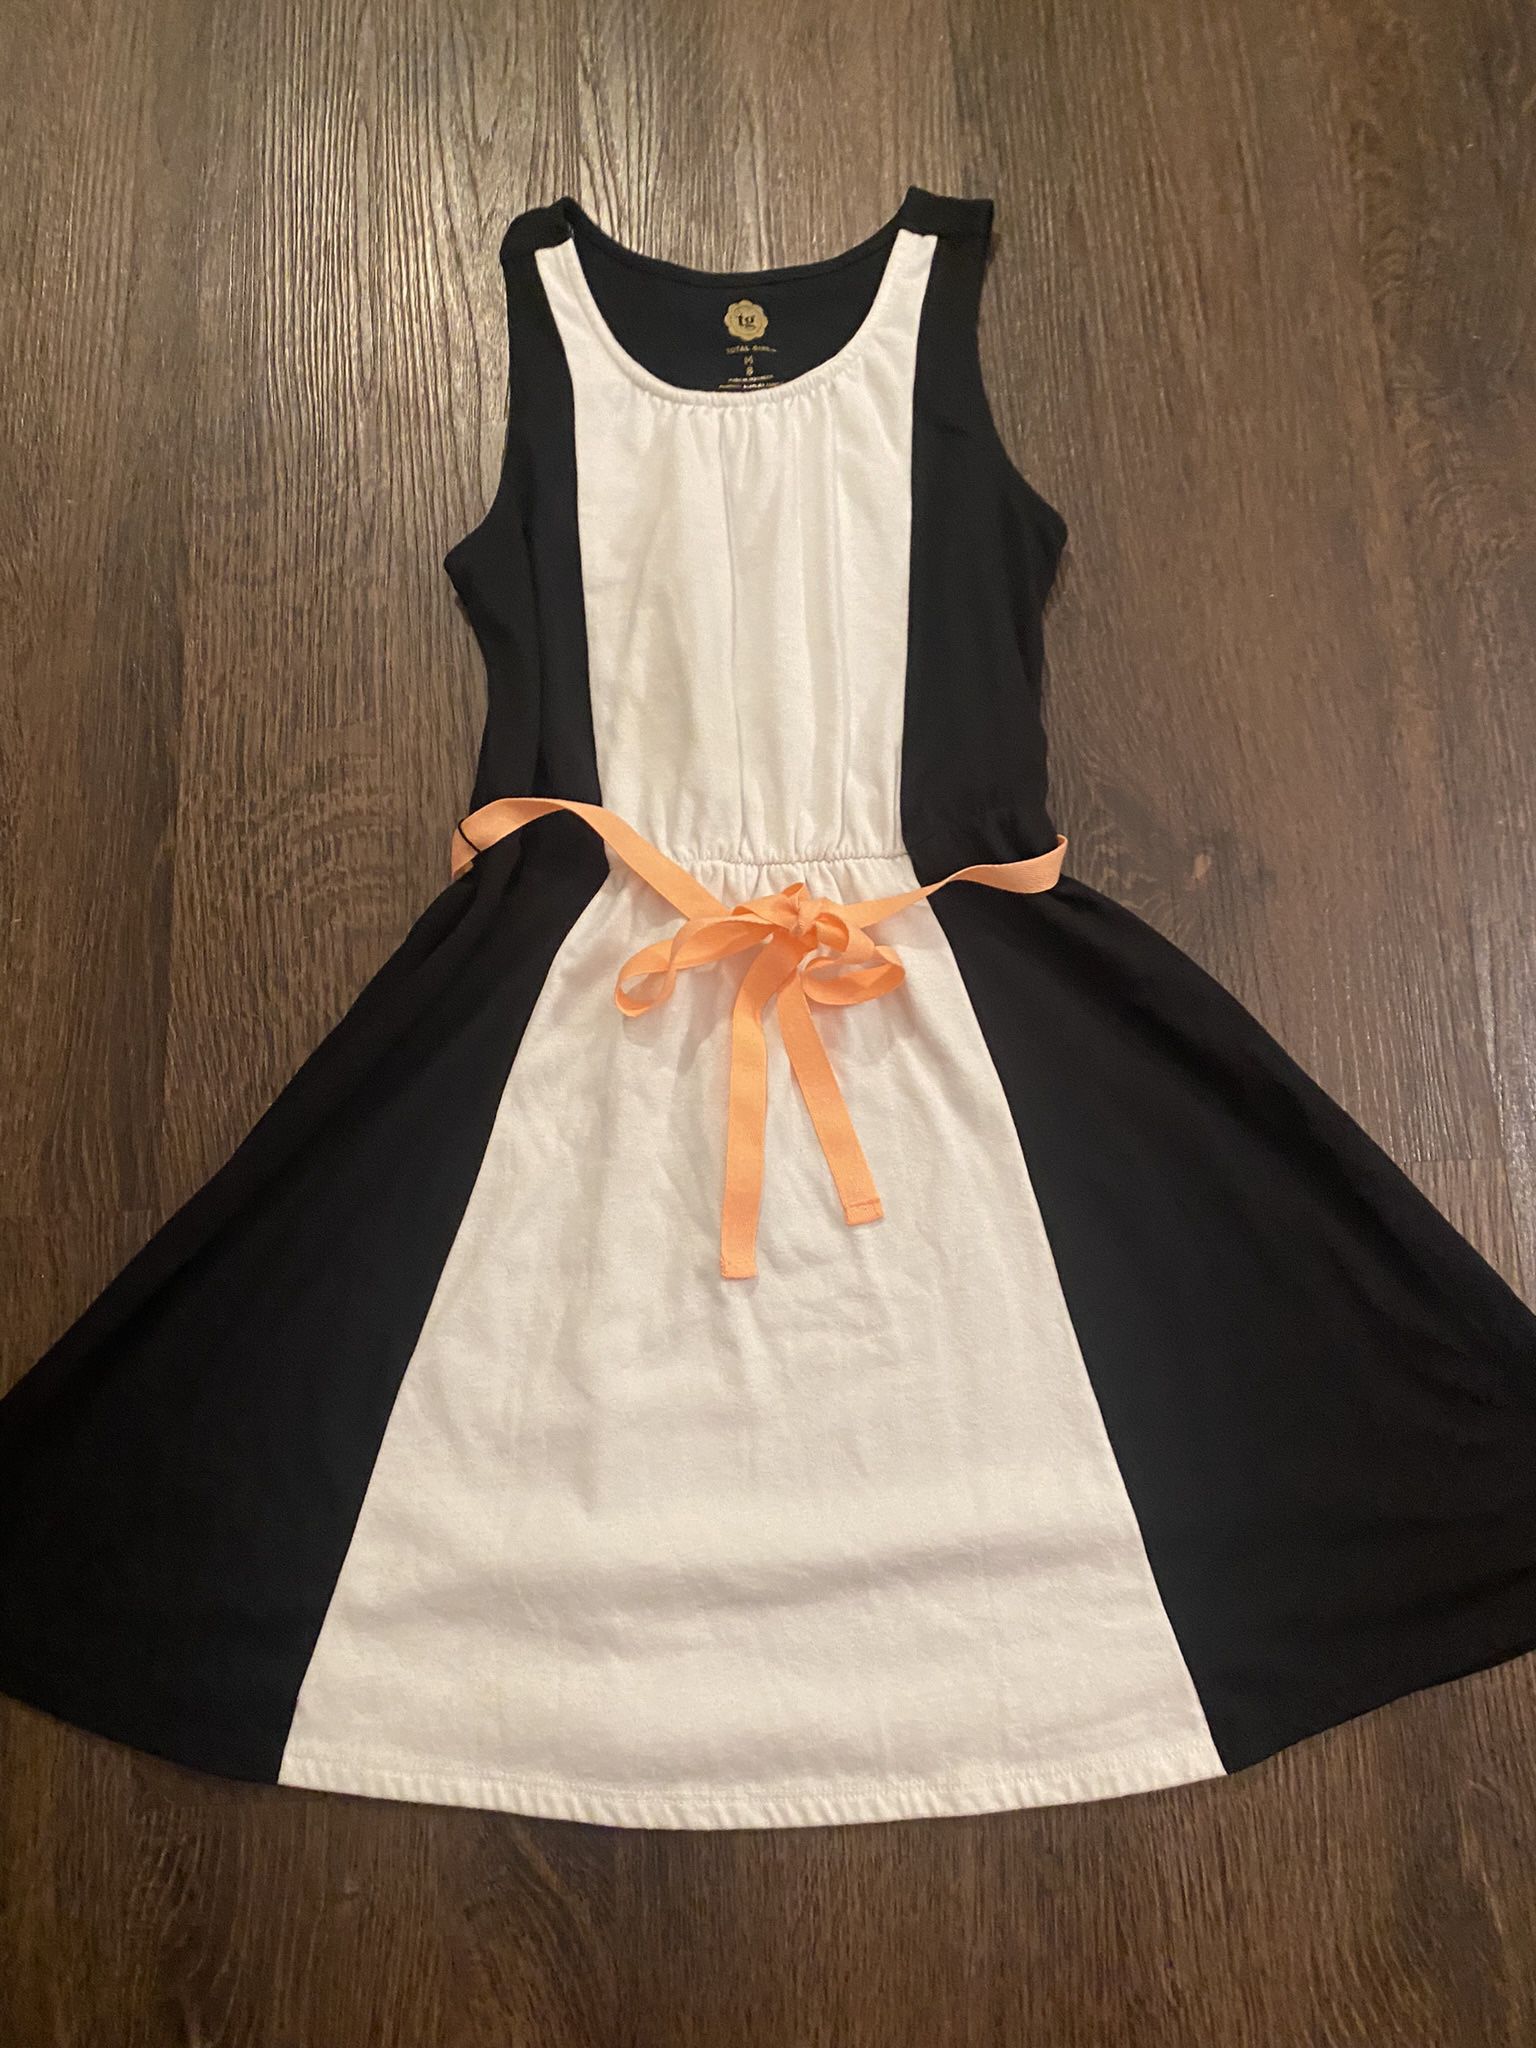 Girls Black And White Dress Size 8 By Total Girl #11